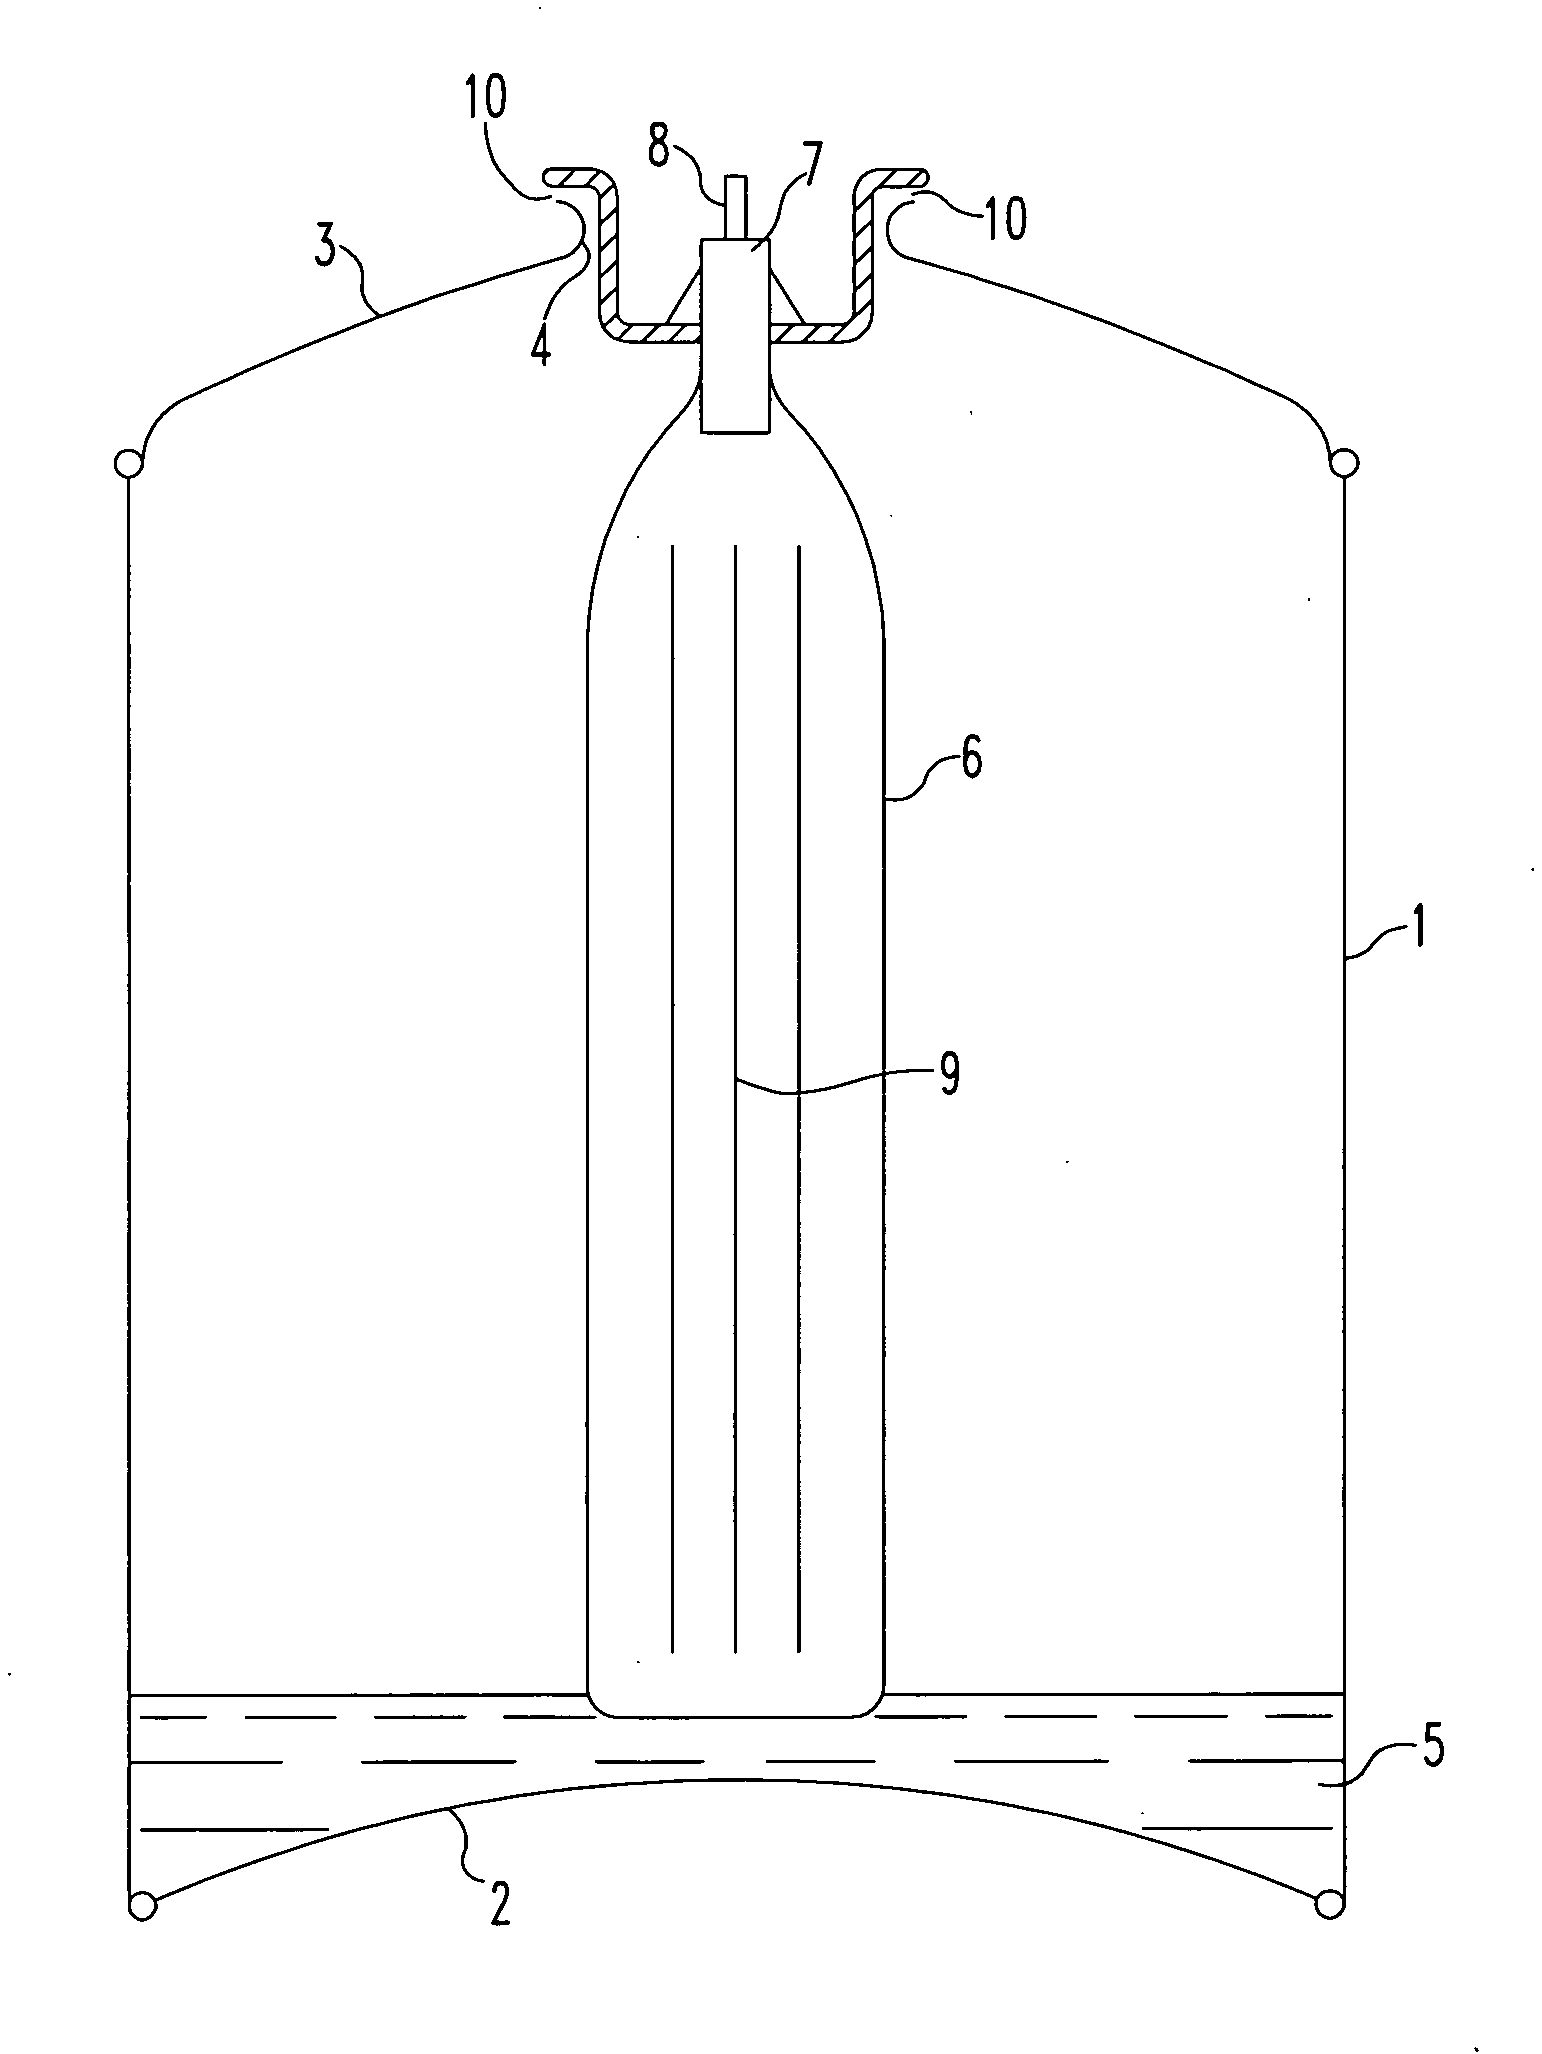 Method for manufacturing a product dispensing canister